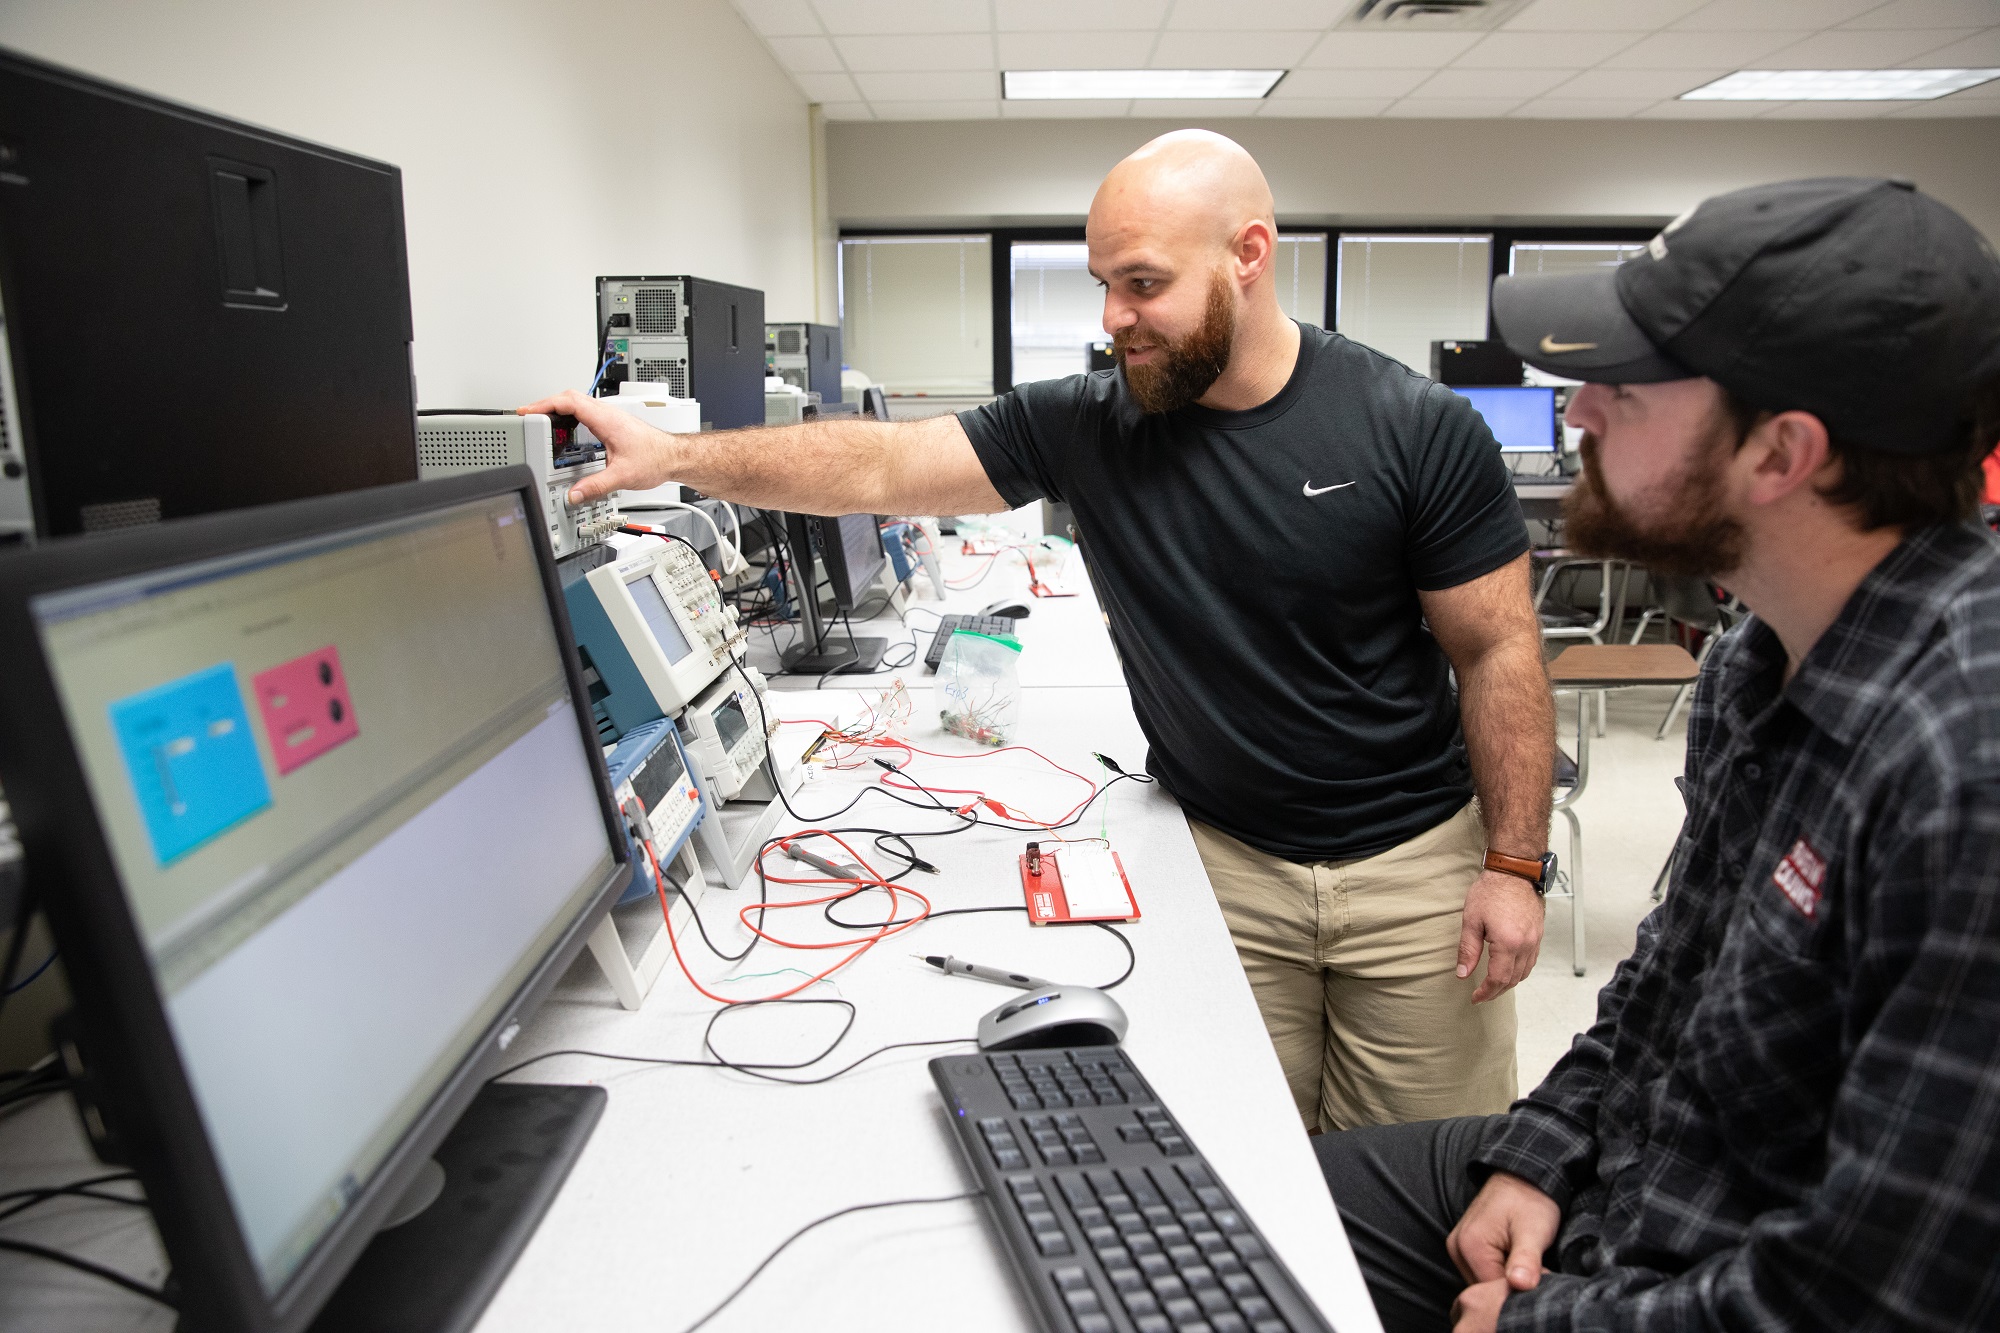 MS in Systems Technology alumn James Guillory is pictured working with technical equipment.